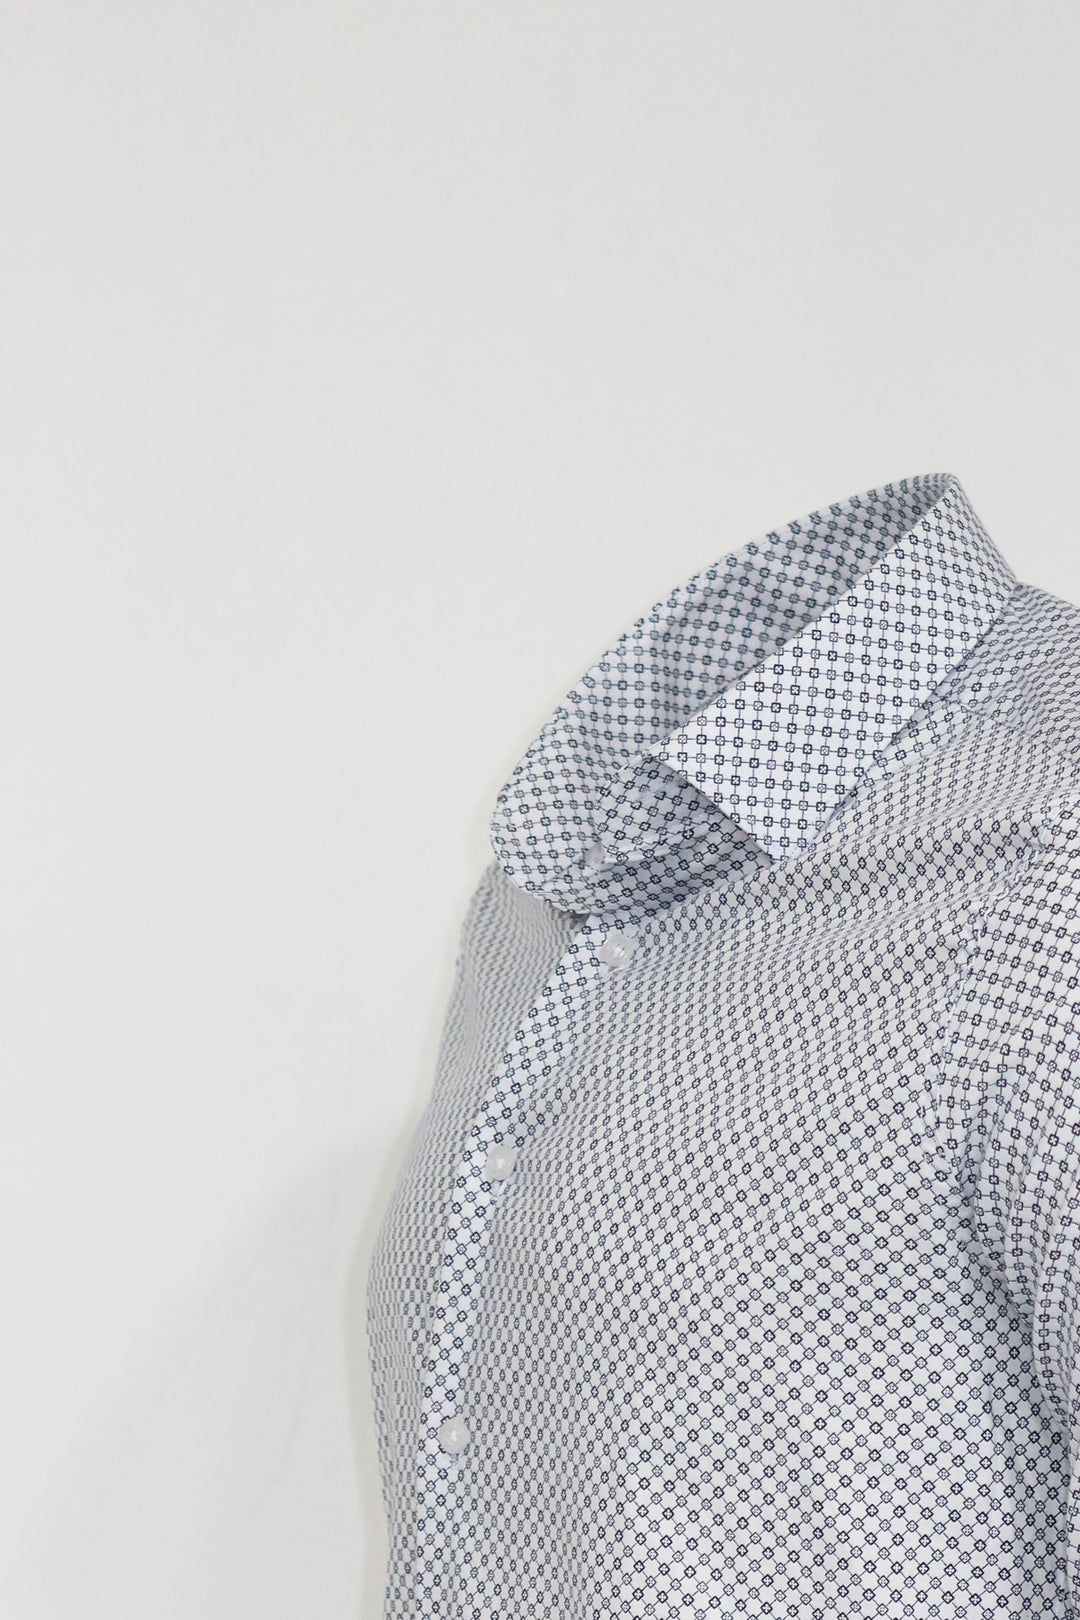 White Tiny Check Patterned Slim Fit Shirt - Wessi